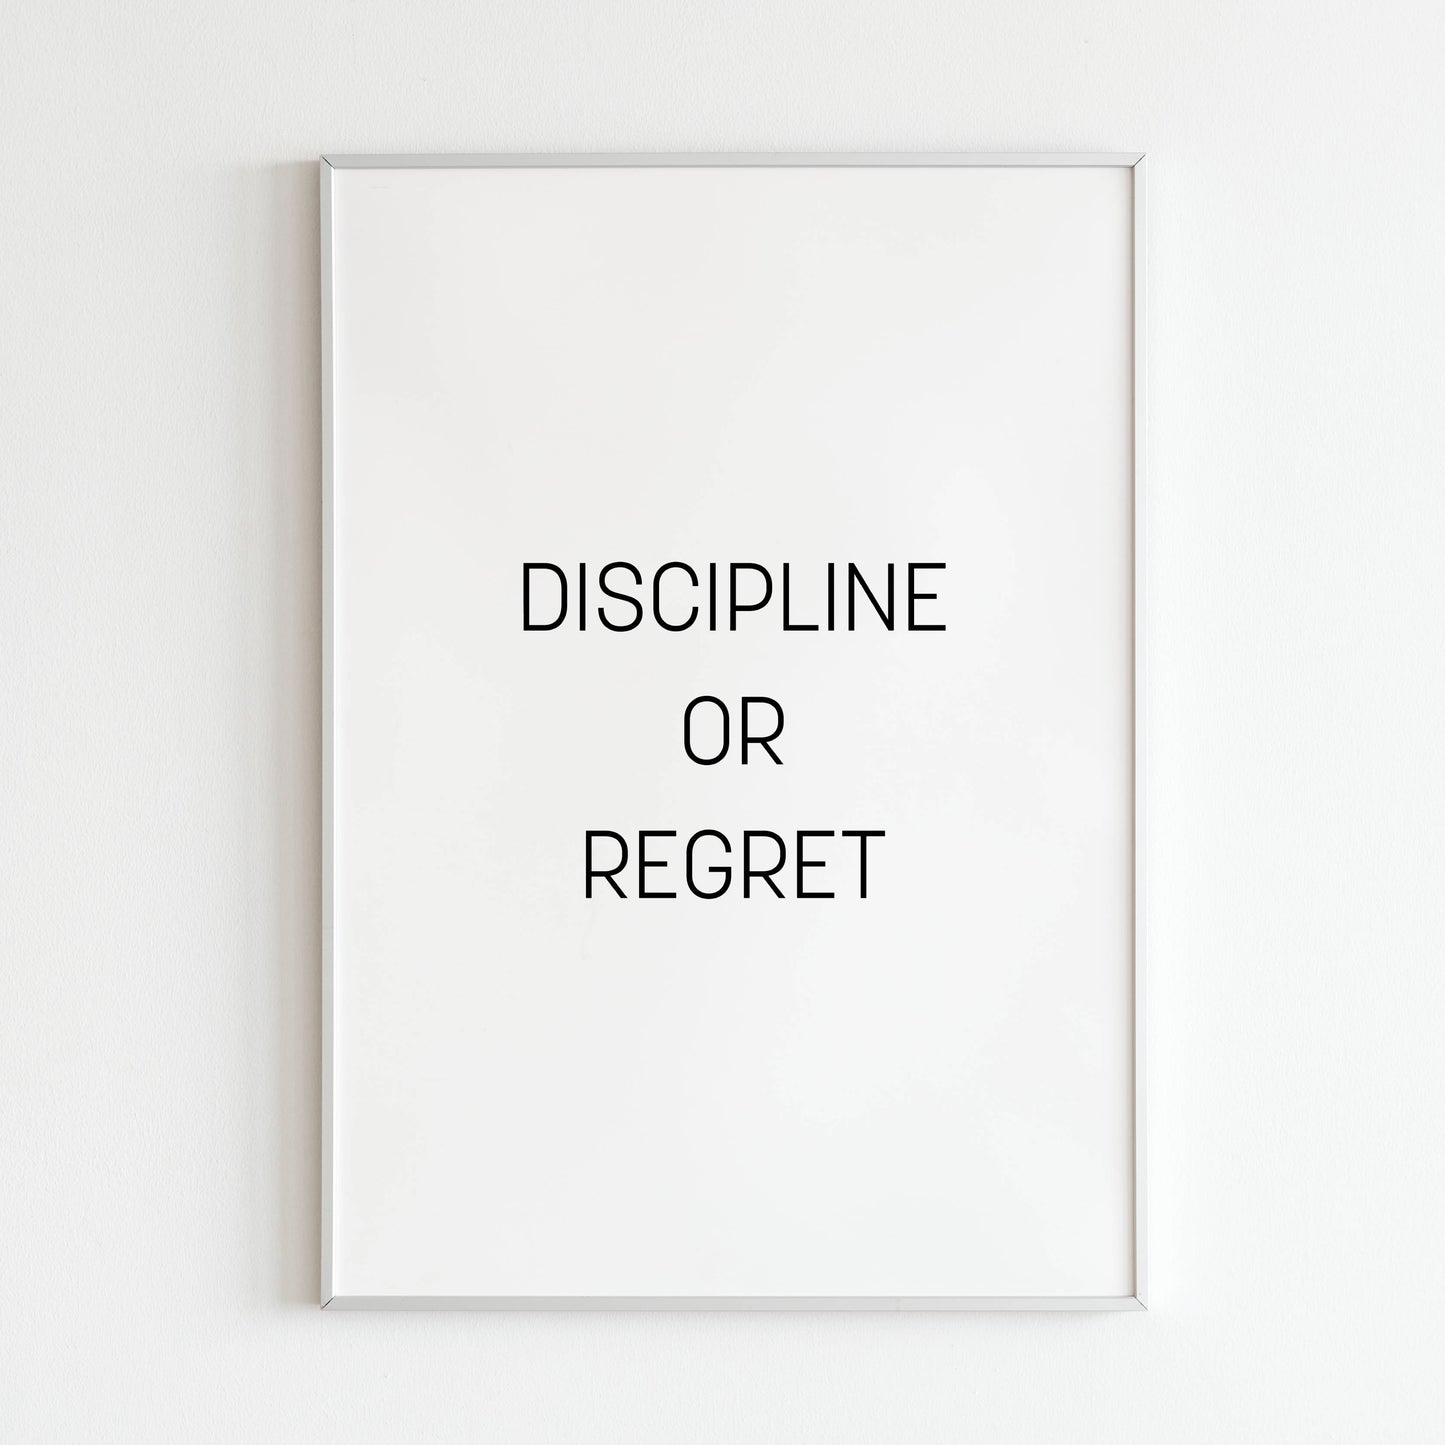 Printable discipline quote poster - Uplifting typography art motivating positive choices.